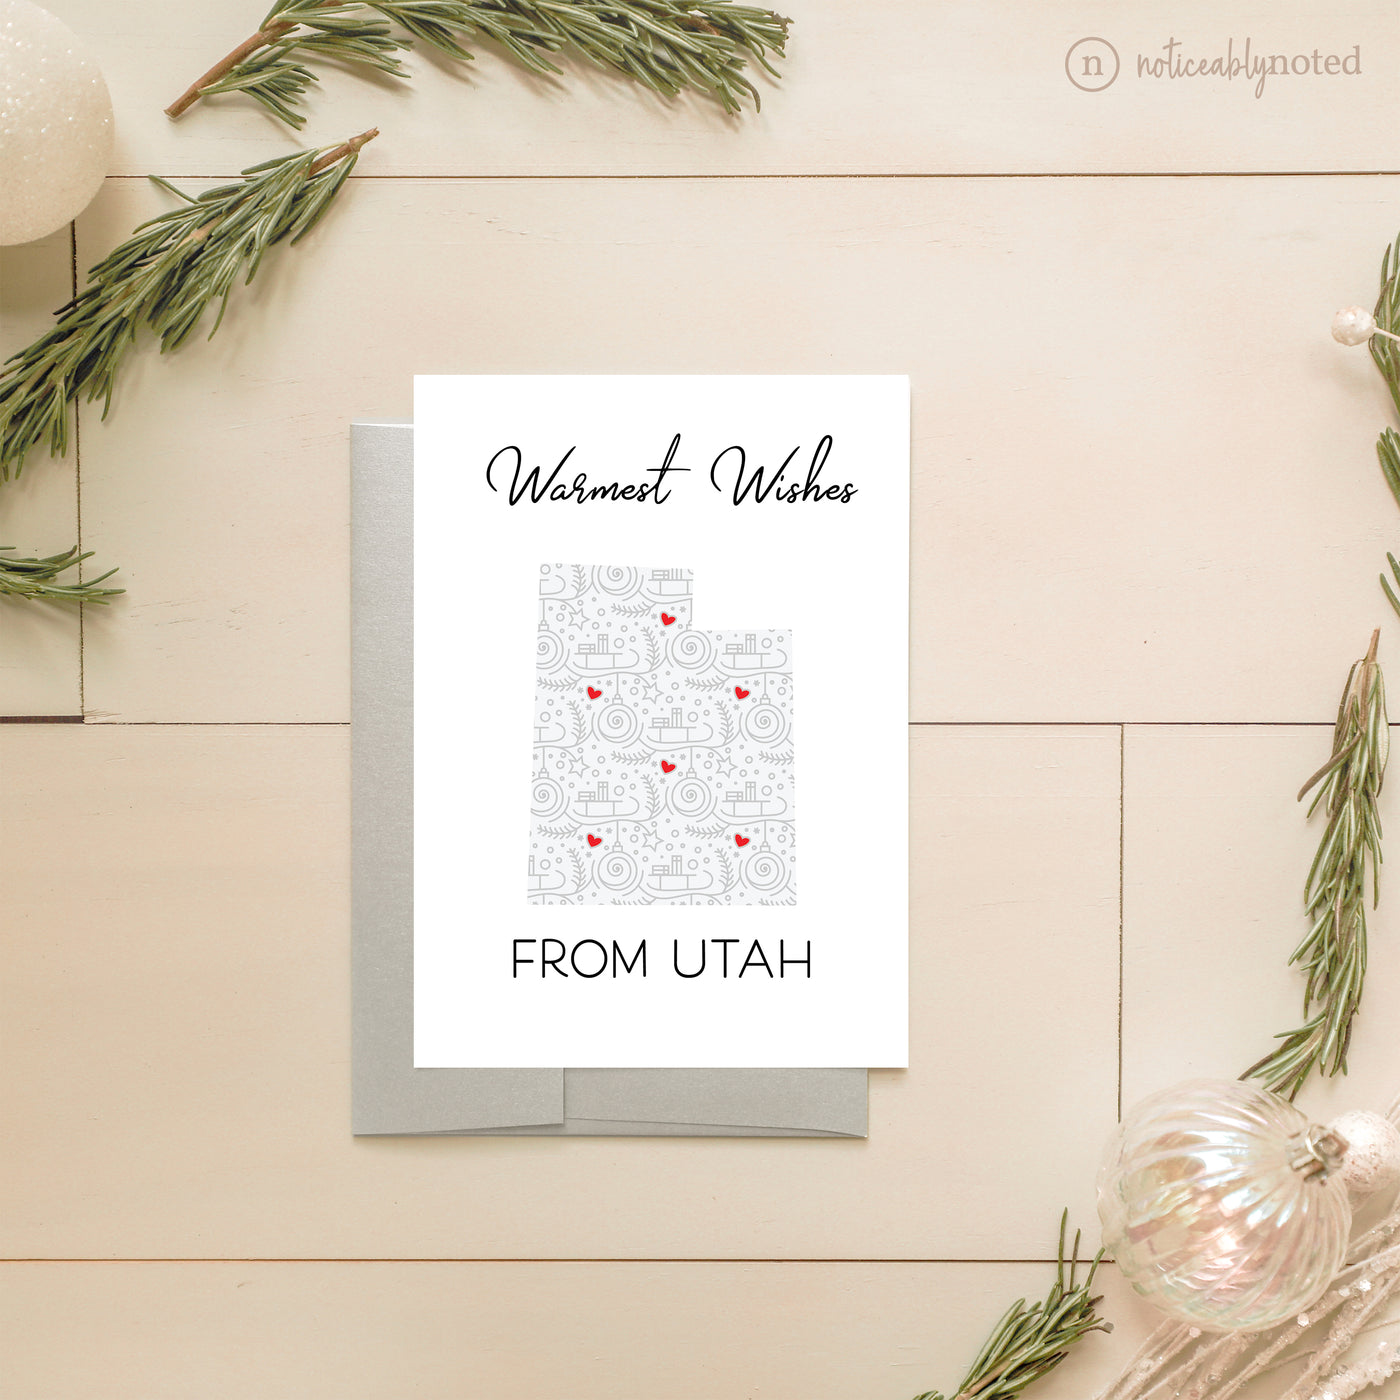 Utah Christmas Card - Warmest Wishes | Noticeably Noted